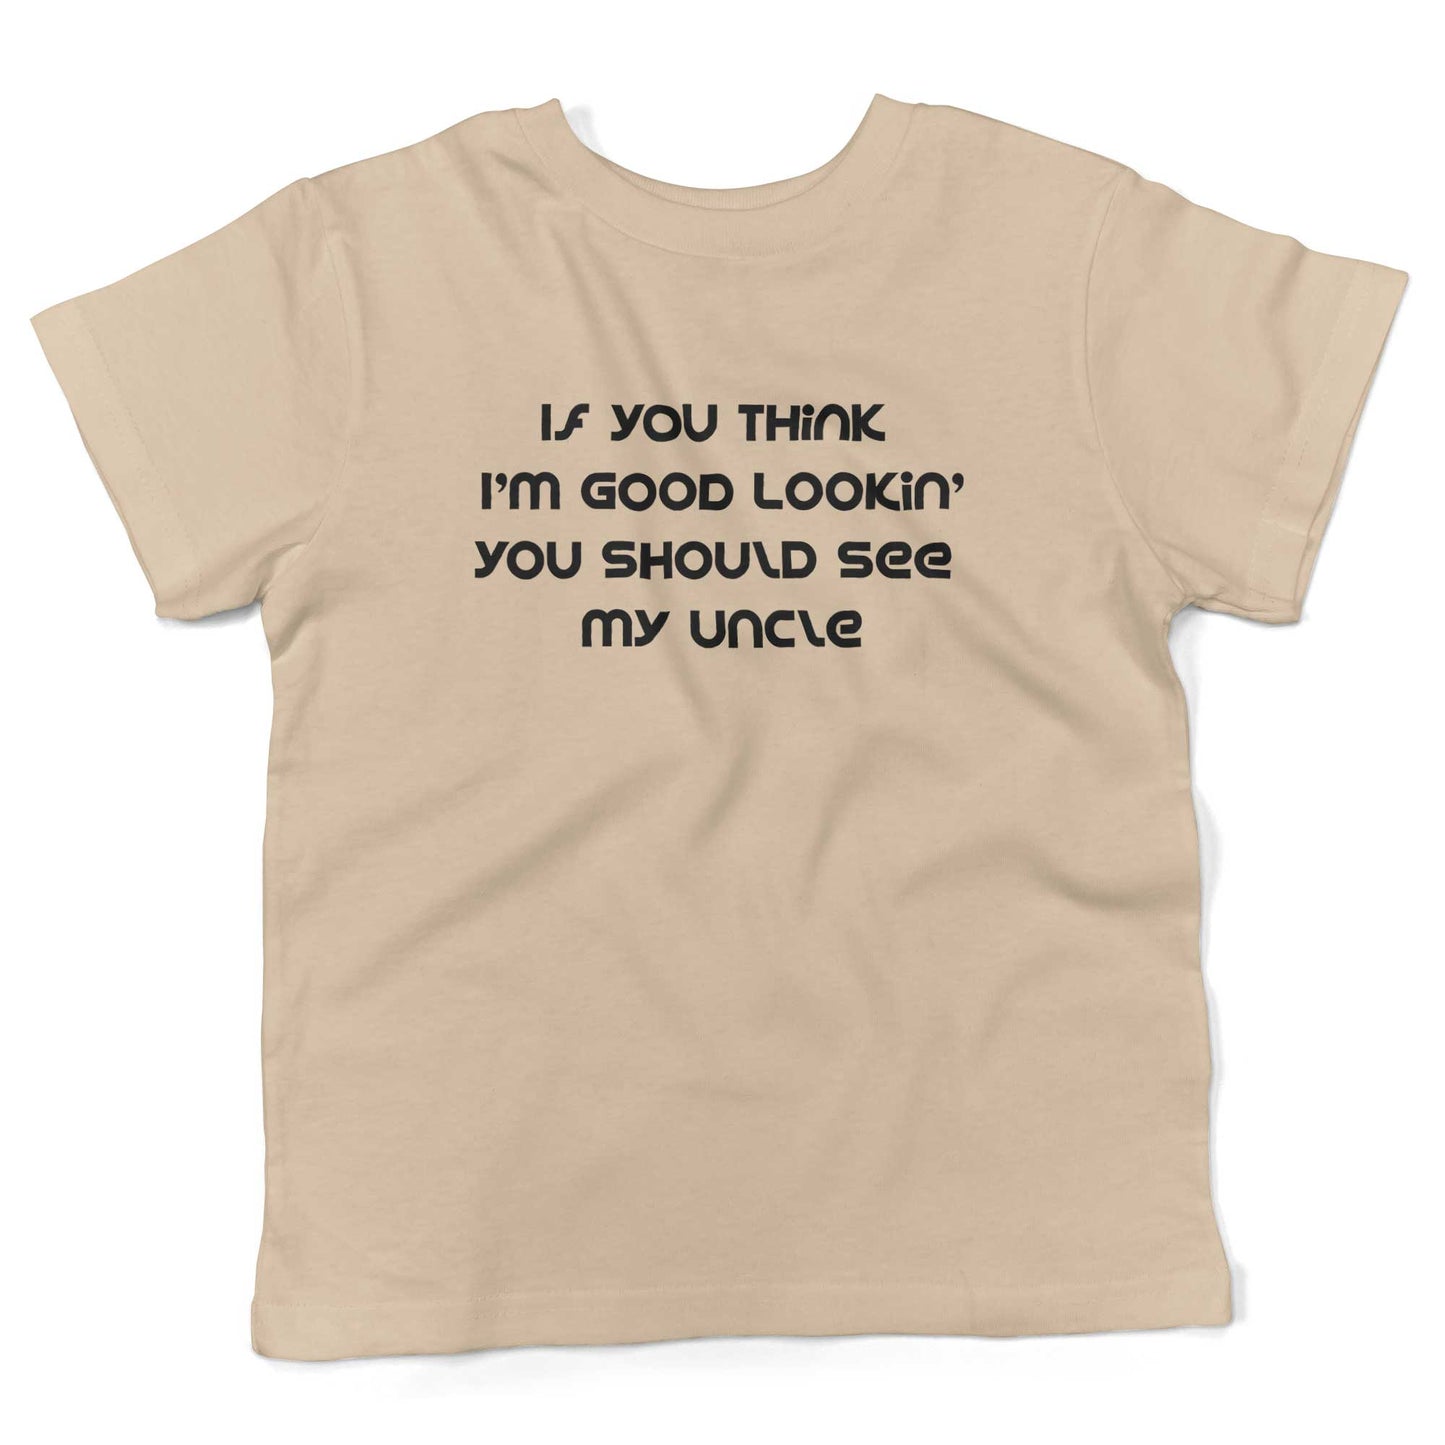 If You Think I'm Good Lookin' You Should See My Uncle Toddler Shirt-Organic Natural-2T